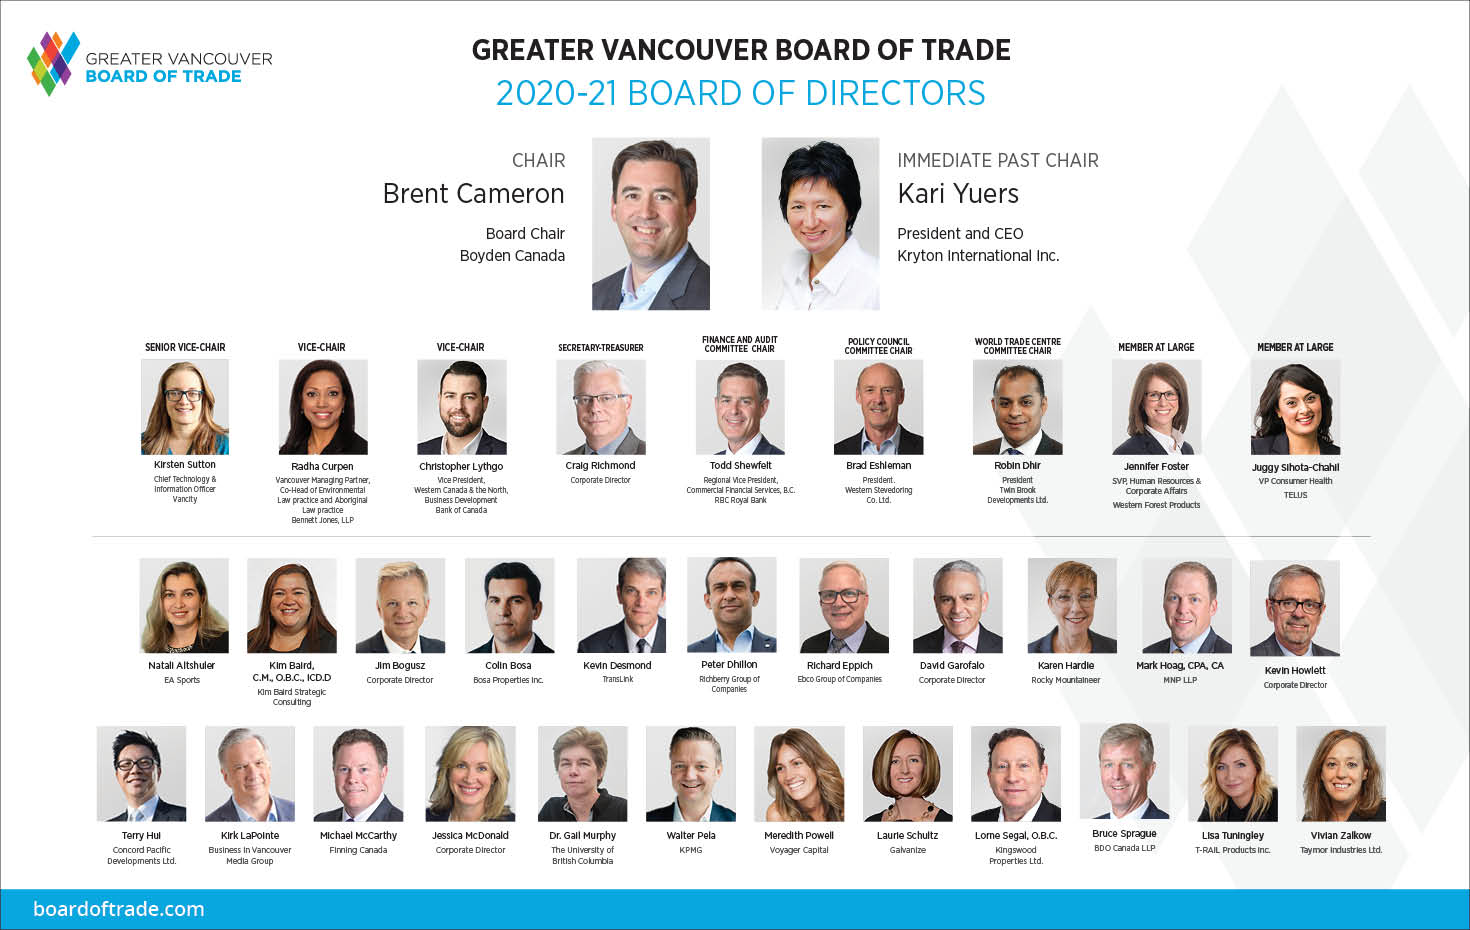 The Greater Vancouver Board of Trade appointed its 2019-20 board of directors today during its 132nd Annual General Meeting.